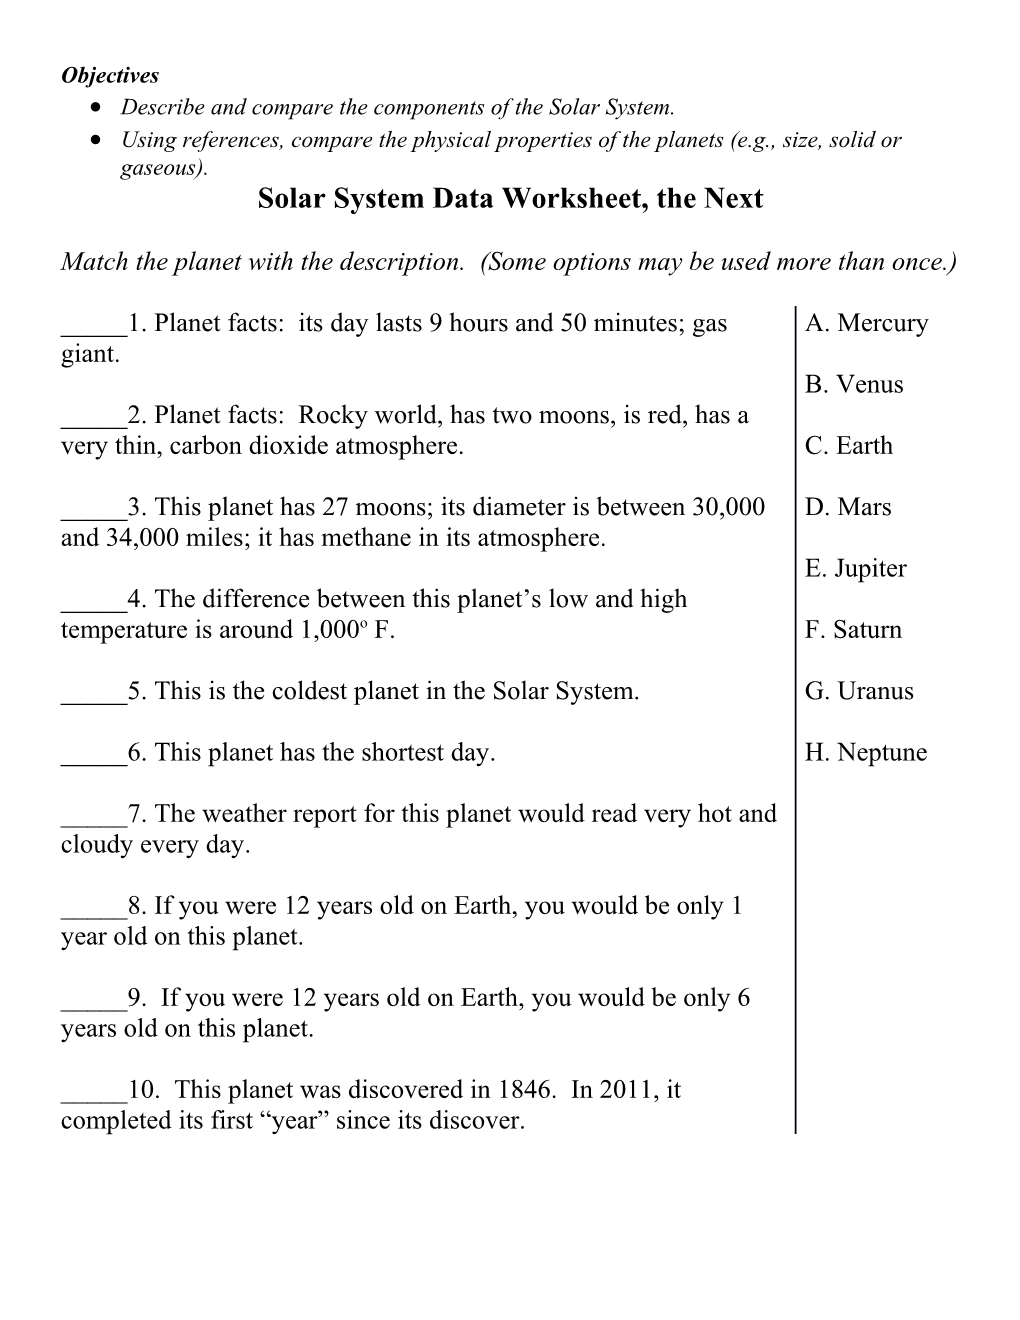 Describe and Compare the Components of the Solar System